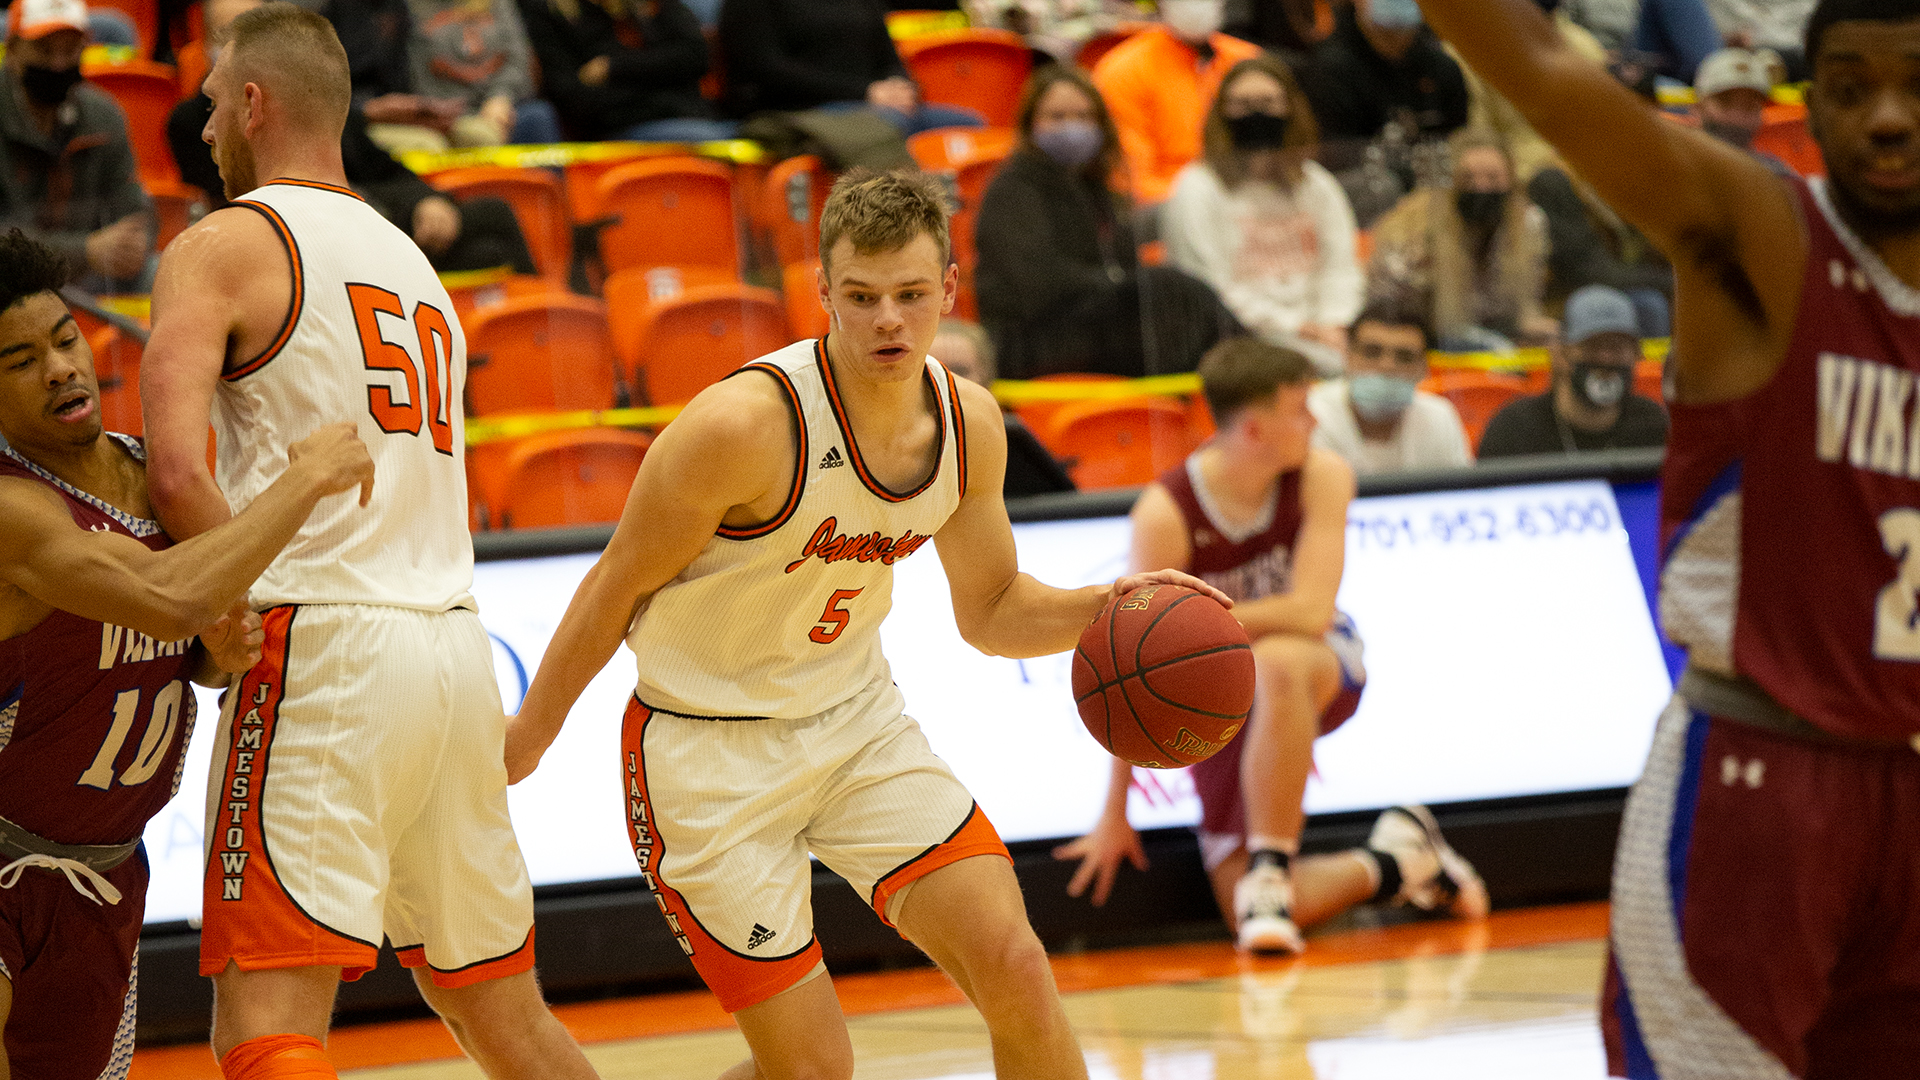 Jimmies fall at the buzzer to Mount Marty